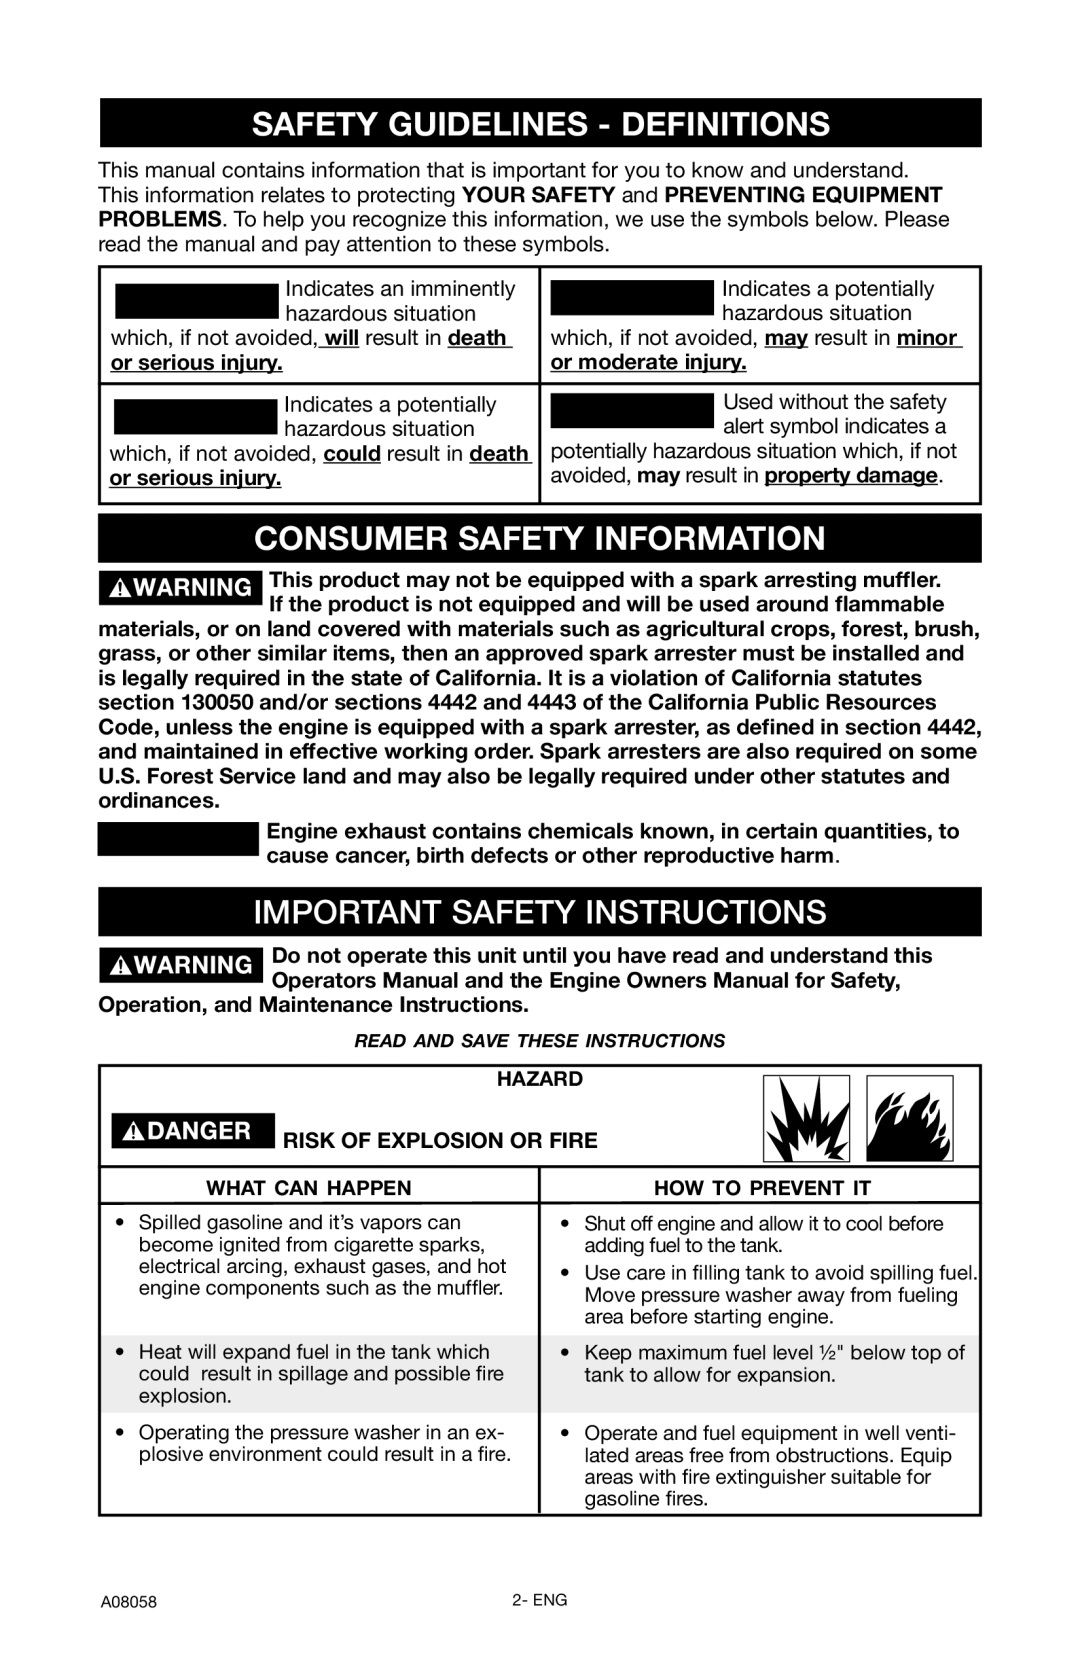 Porter-Cable PCH3740 Safety Guidelines - Definitions, Consumer Safety Information, Important Safety Instructions 